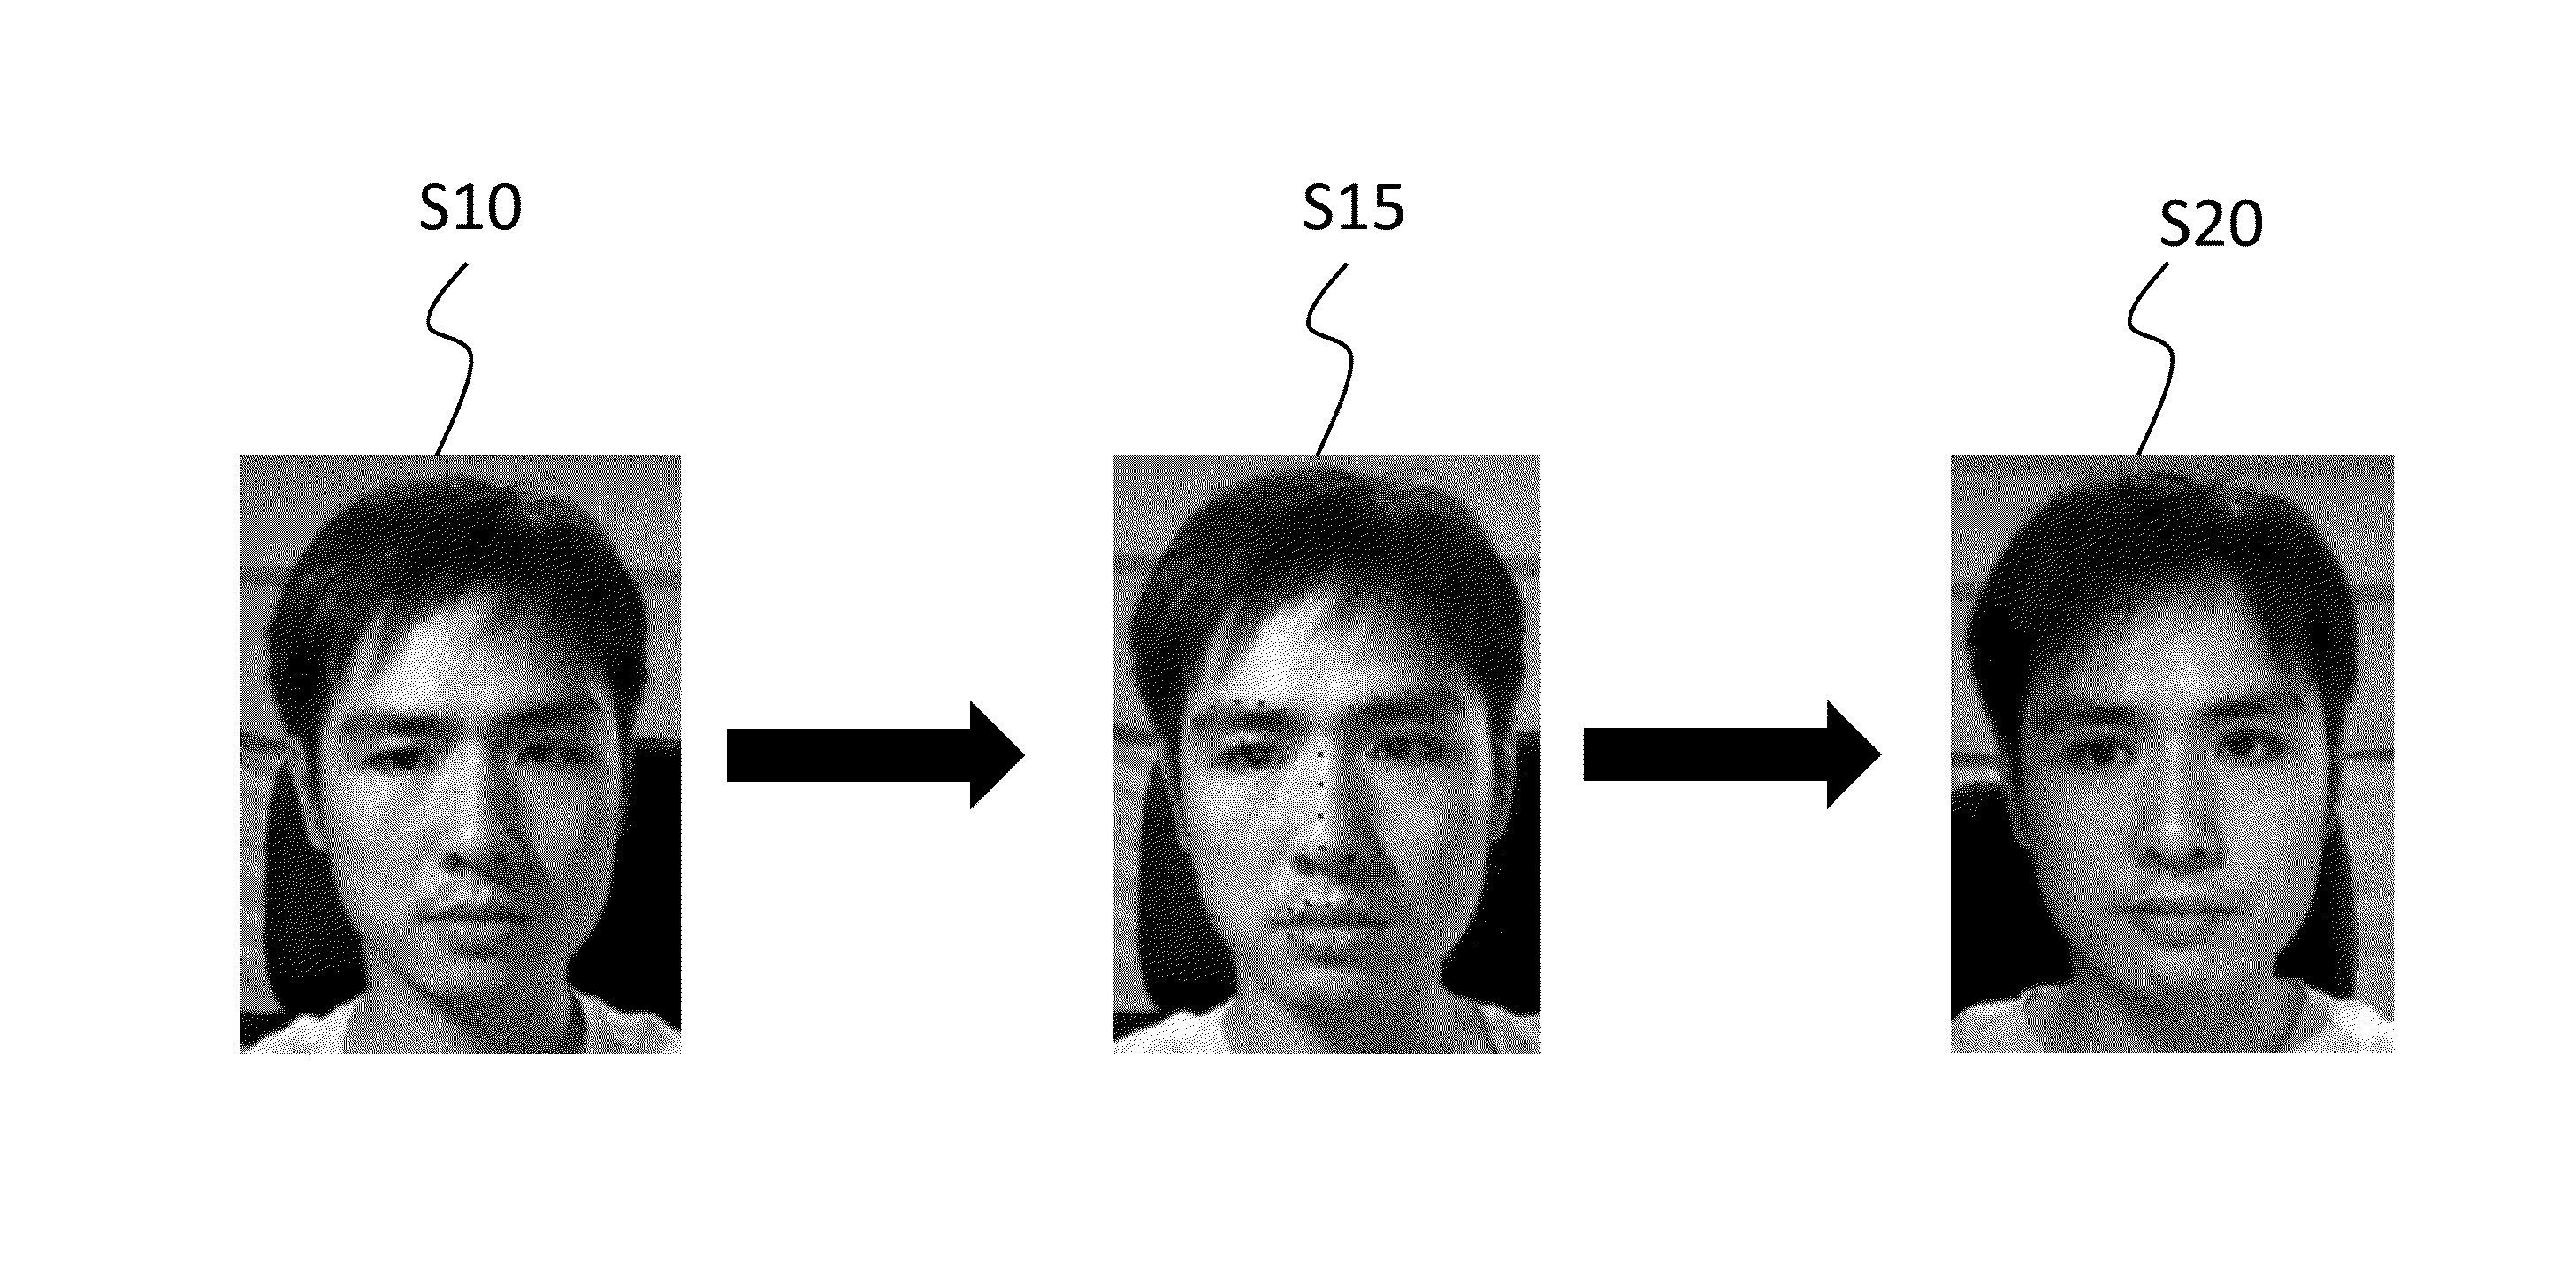 Method of virtual makeup achieved by facial tracking